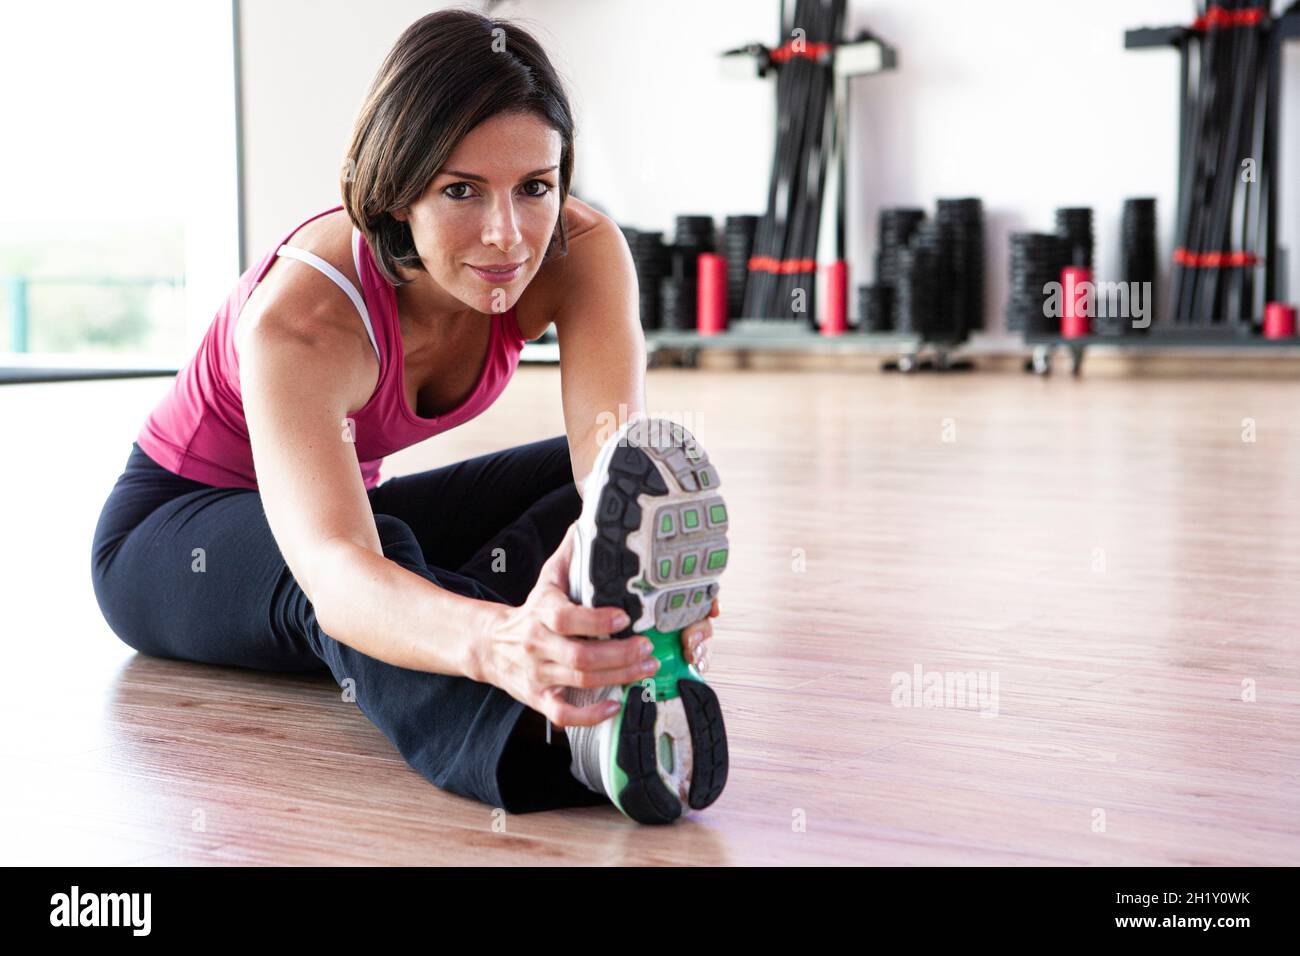 Healthy young woman exercising in a gym Stock Photo